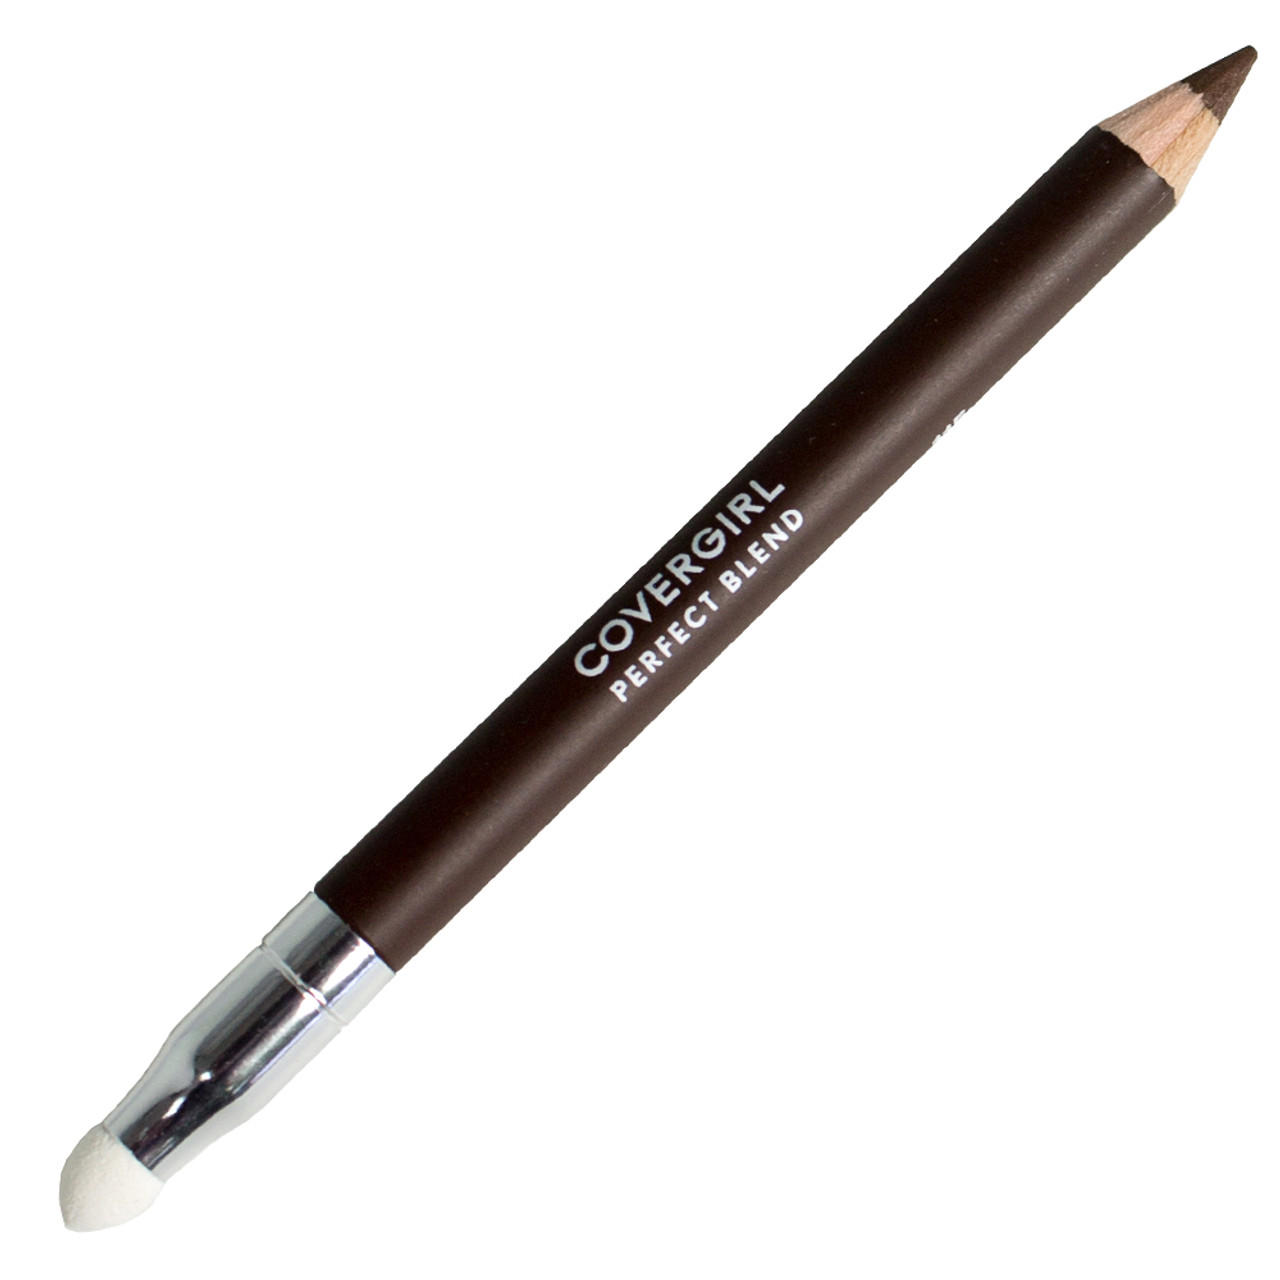 COVERGIRL Perfect Blend Eyeliner Pencil Smoky Taupe, 2 Count 